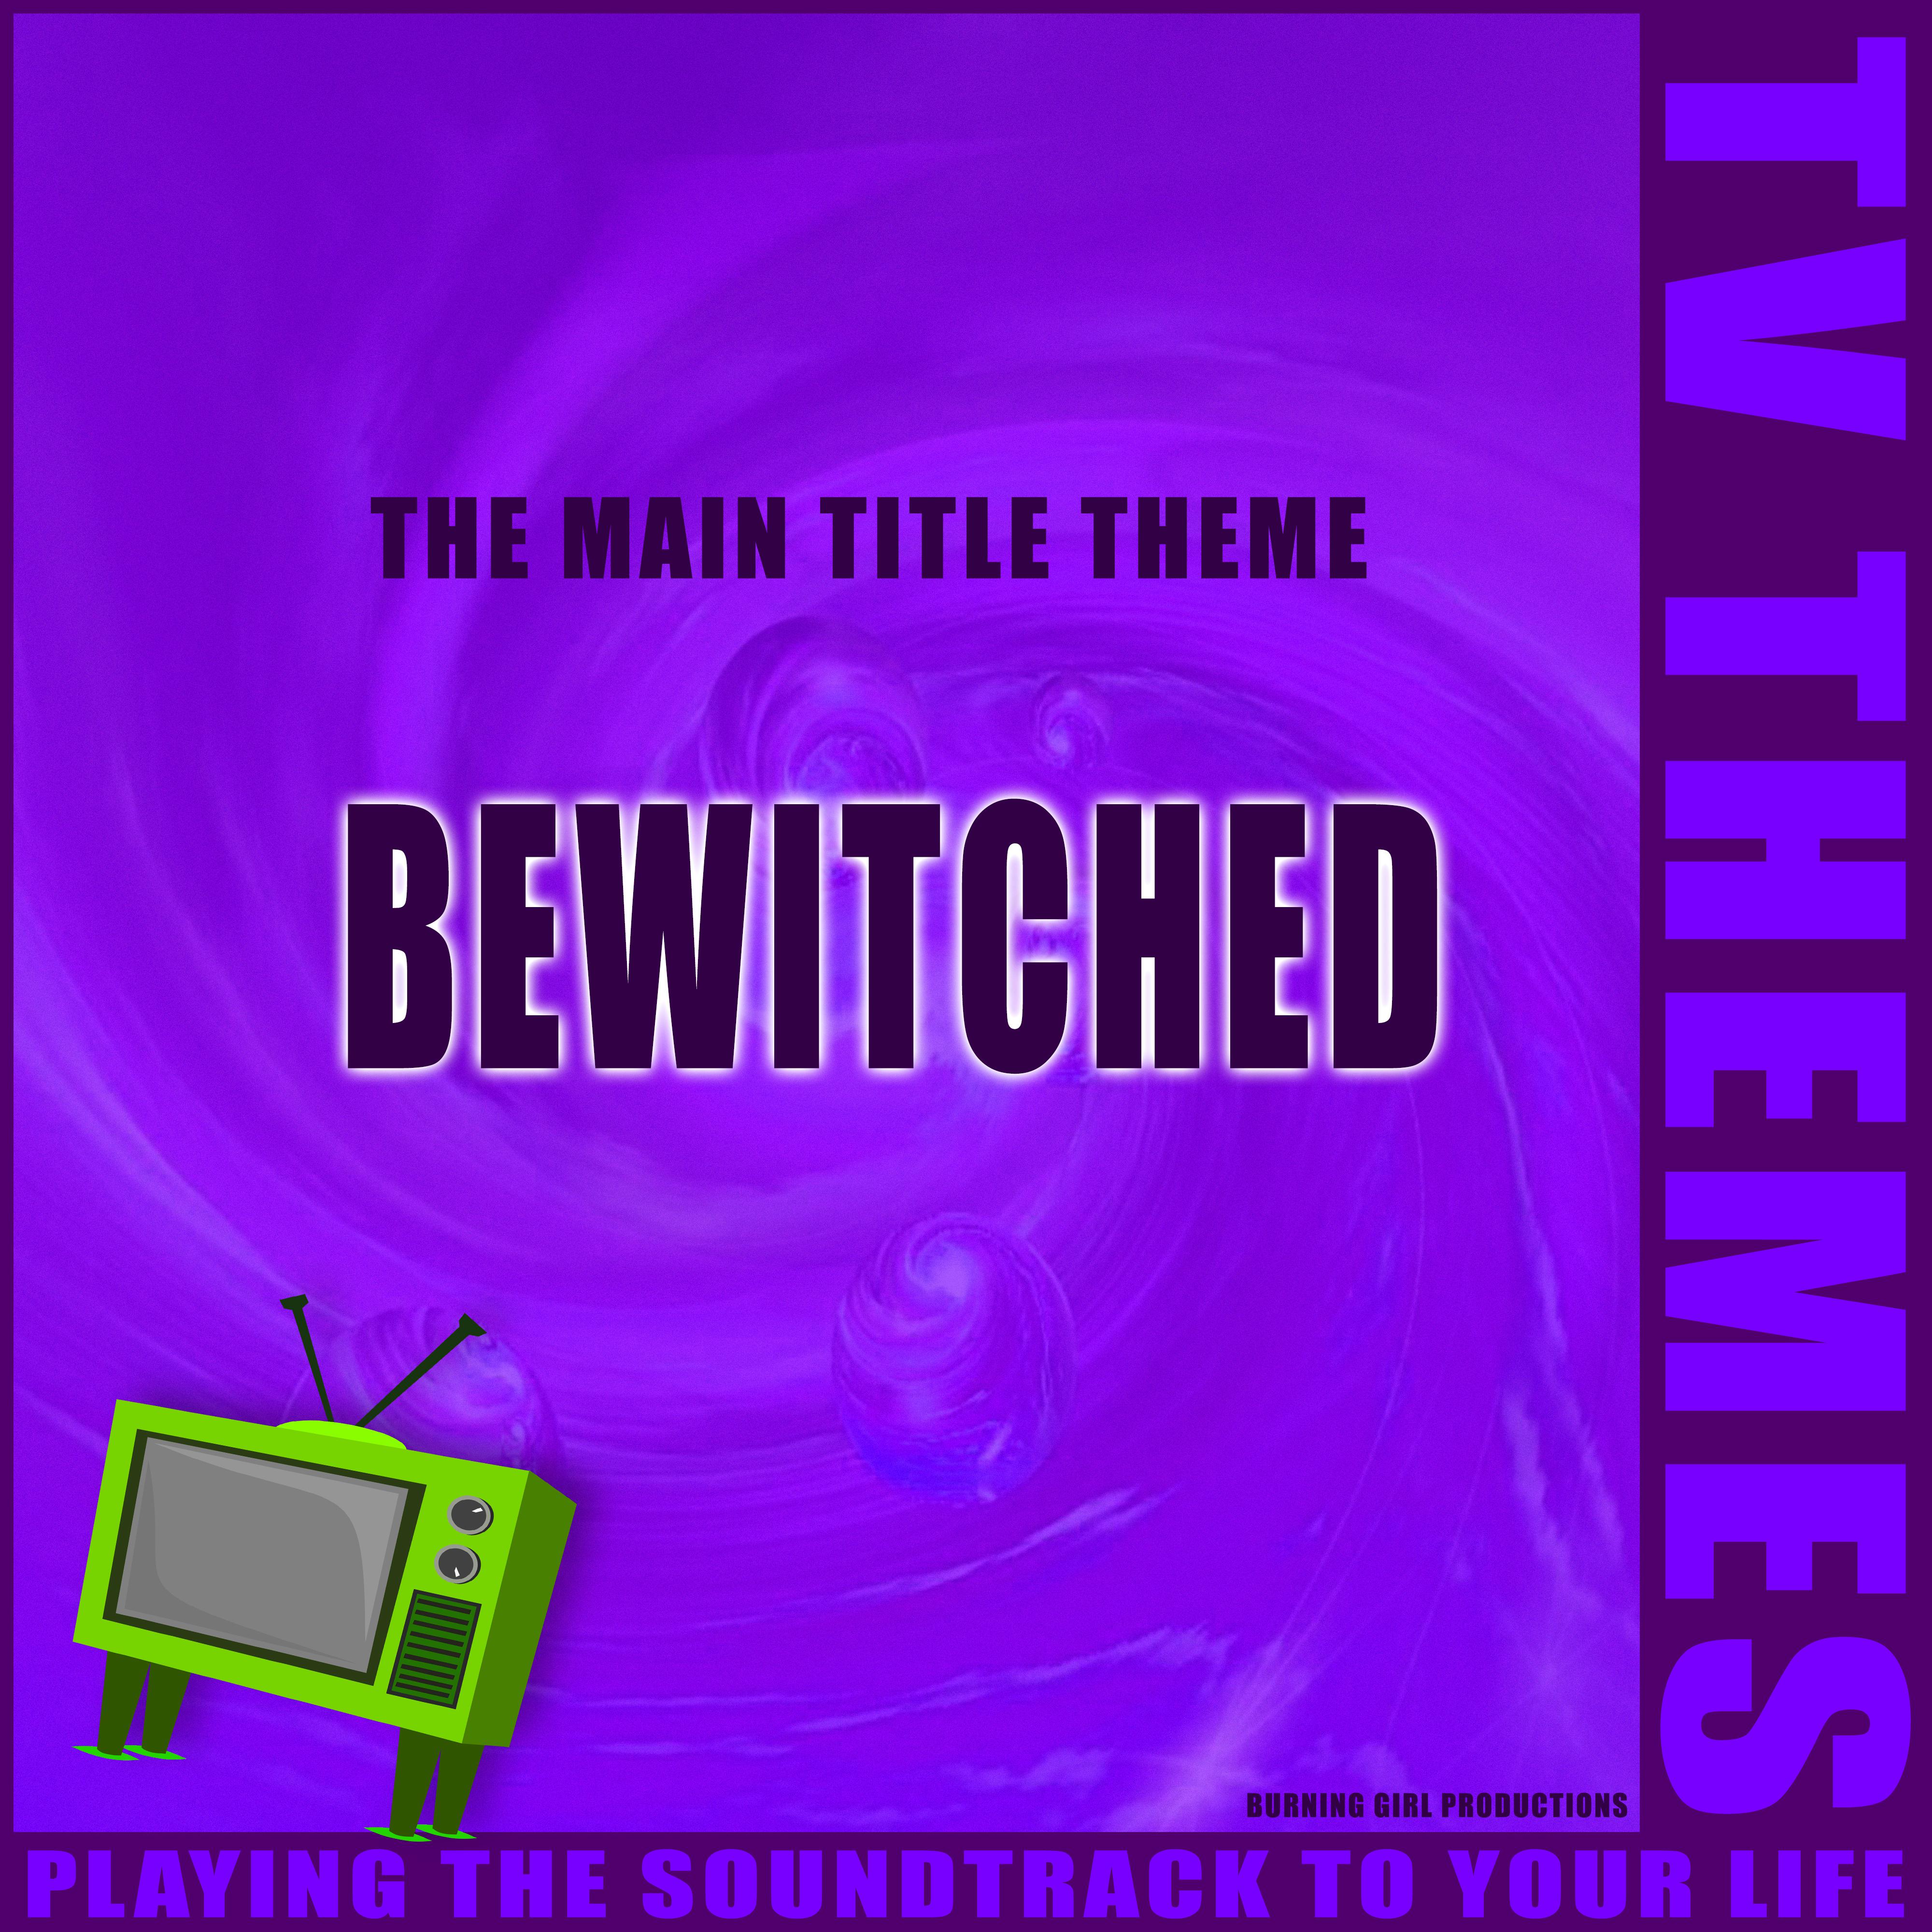 The Main Title Theme - Bewitched